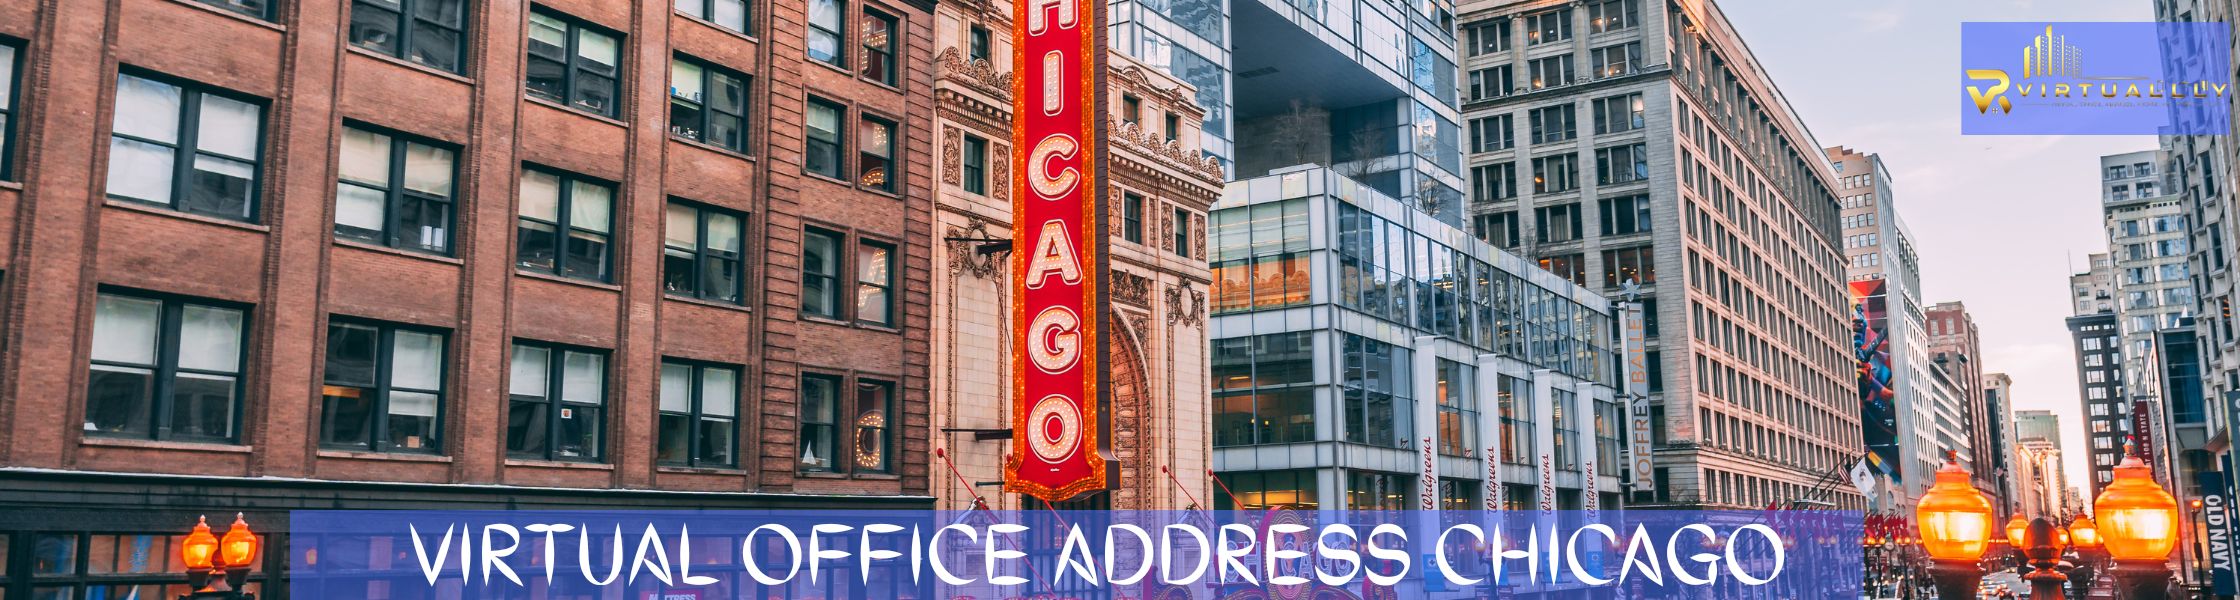 Leading Virtual Office Address Chicago - Virtual Assistant